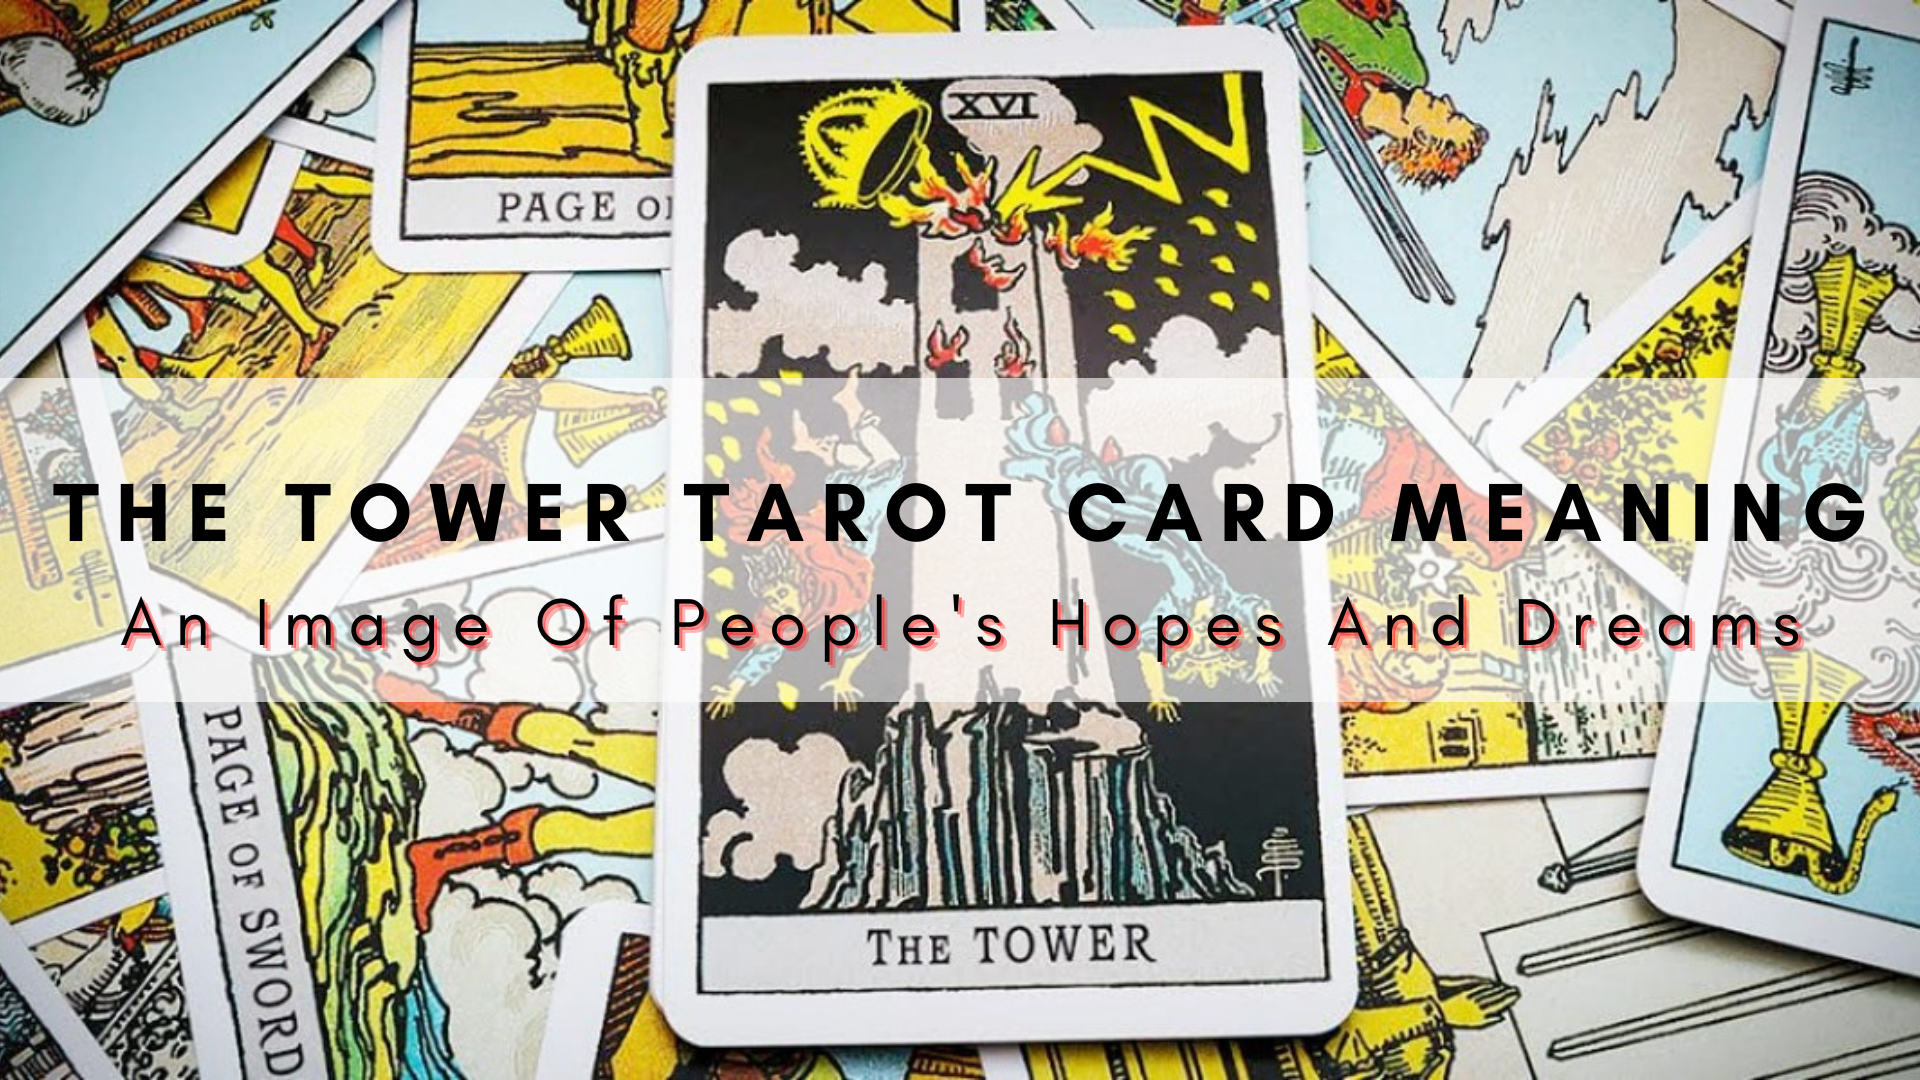 The Tower Tarot Card Meaning -  An Image Of People's Hopes And Dreams